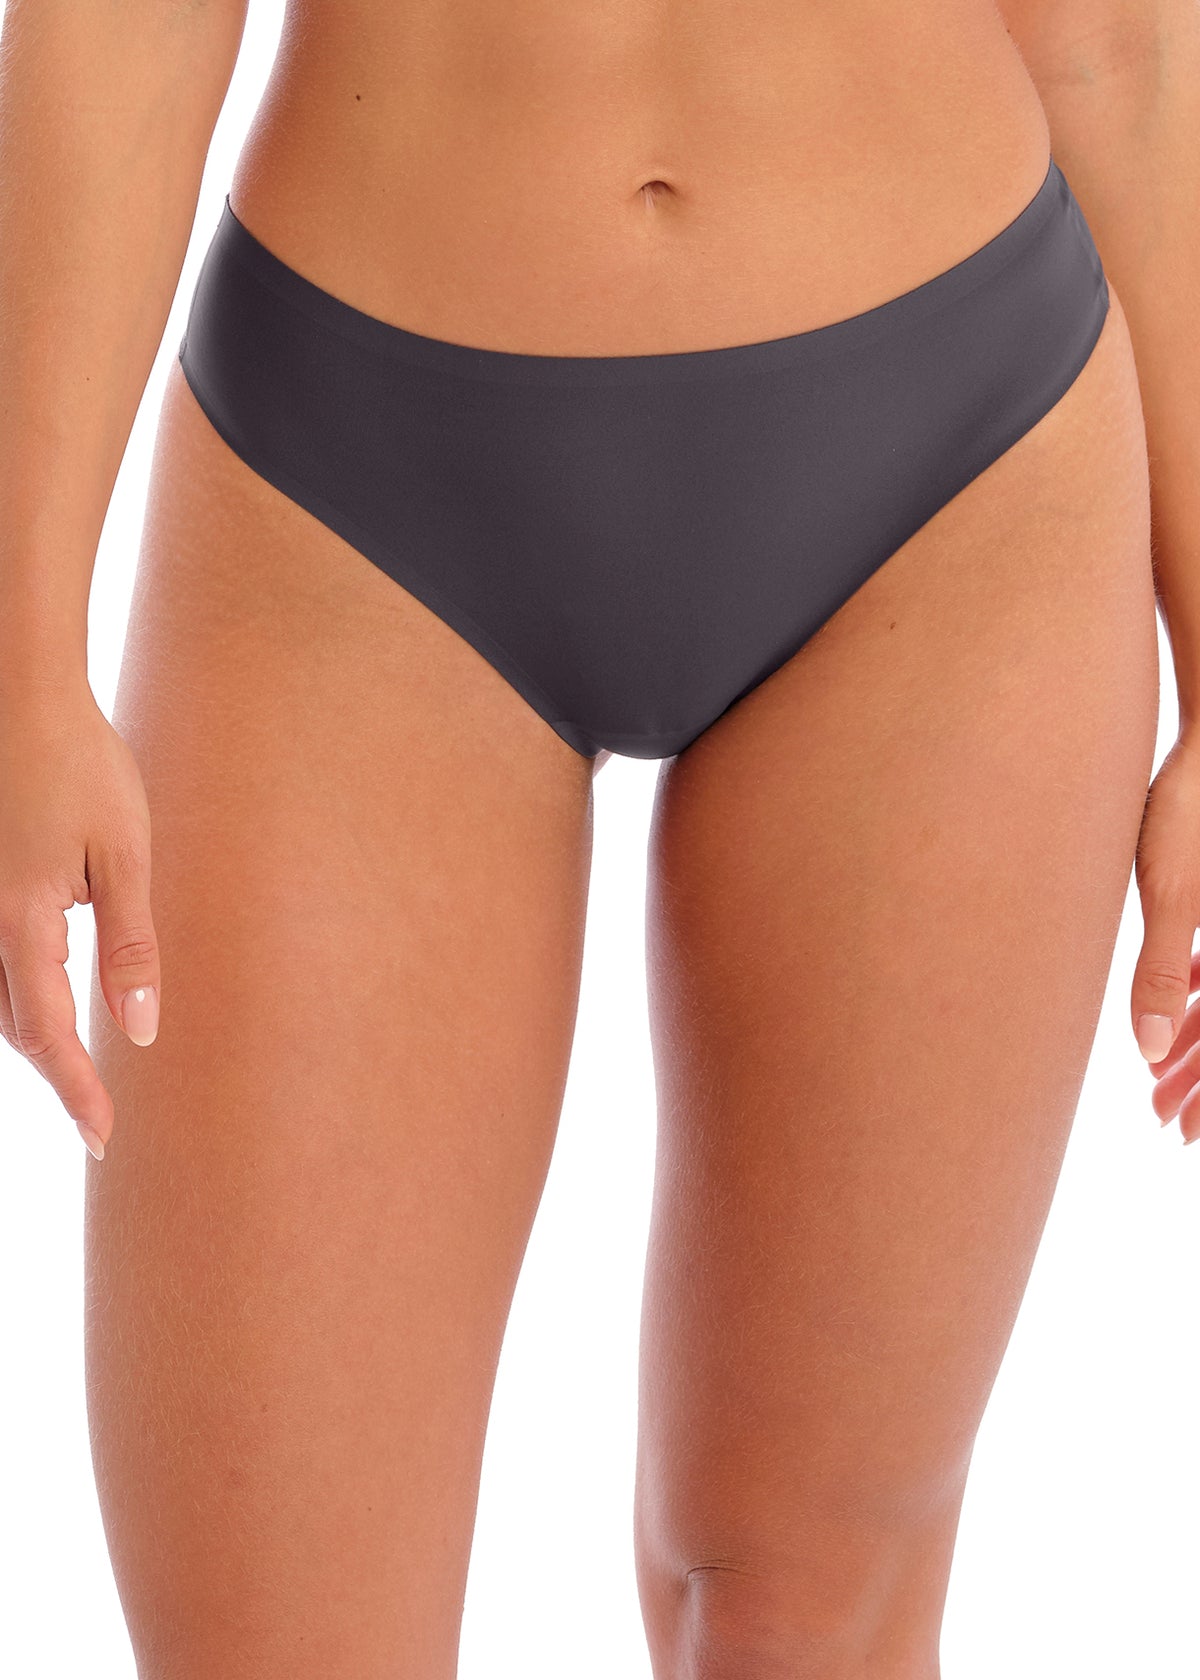 Smoothease Invisible Stretch Thong